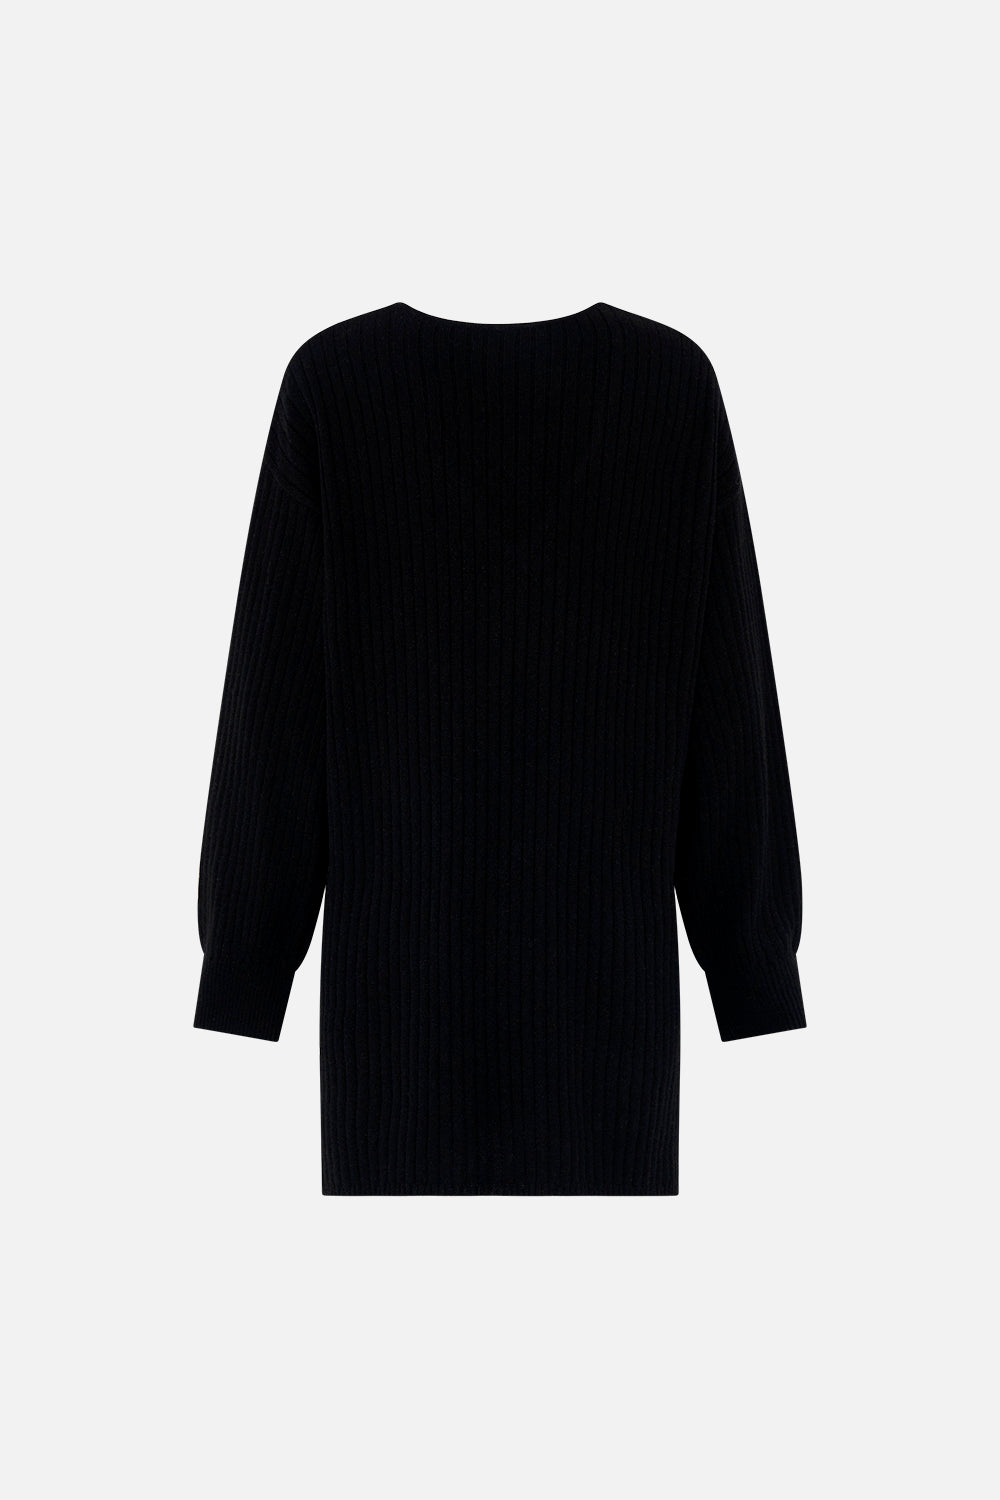 Back product view of CAMILLA black v neck wool cashmere knit jumper in Lions Mane print